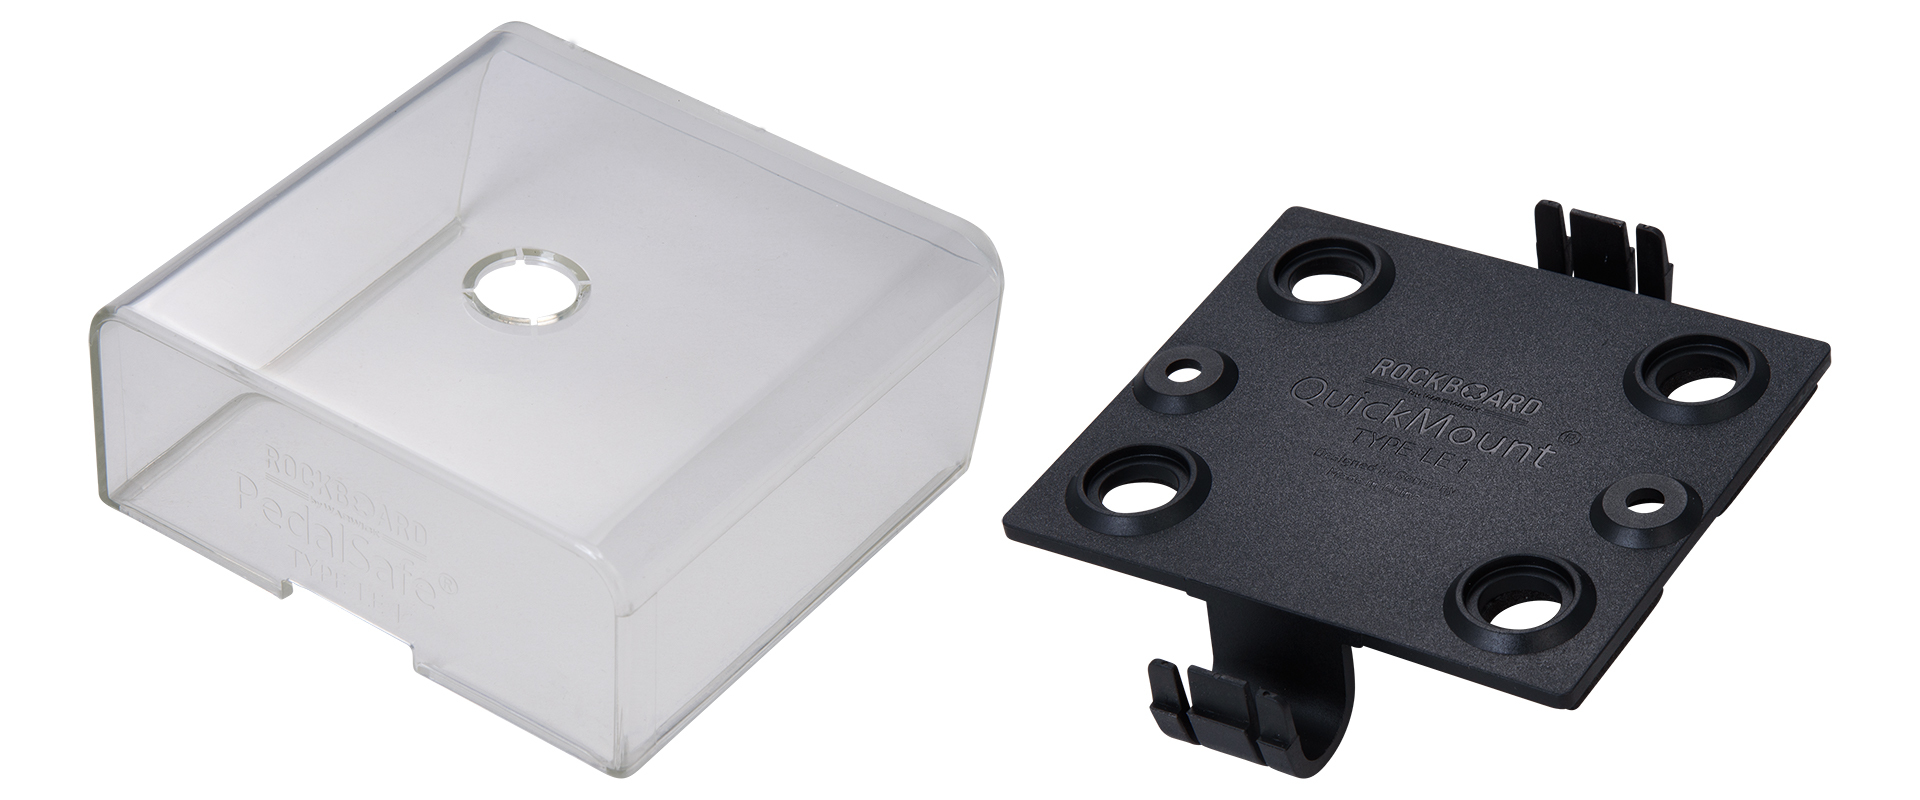 RockBoard PedalSafe Type LE1 - Protective Cover and Rockboard Mounting Plate for LEHLE SundayDriver II, P-Splitt III pedals